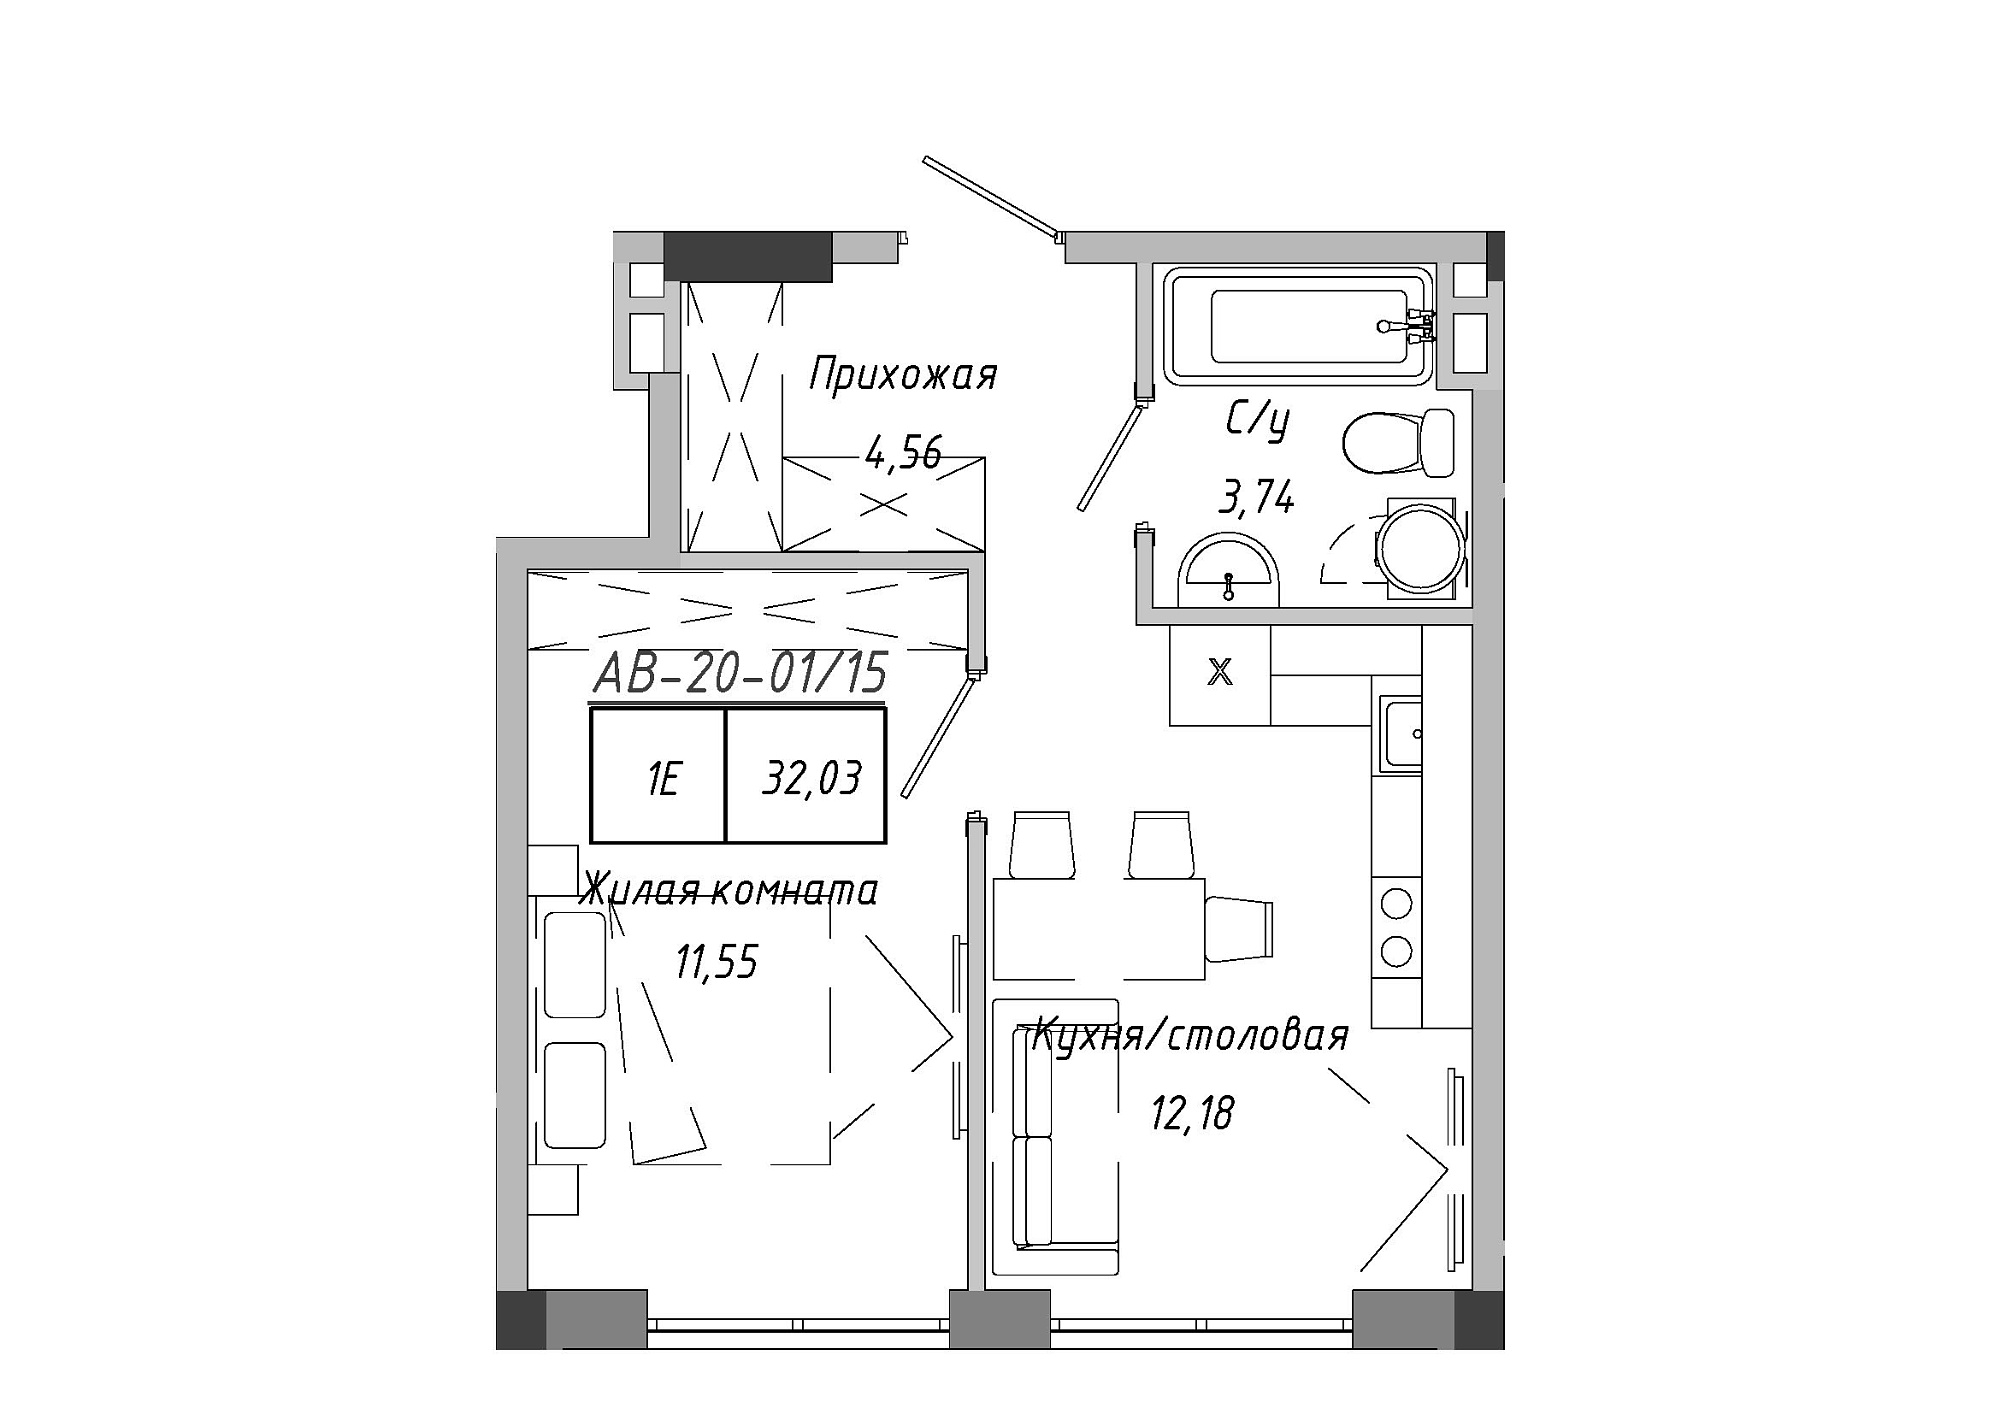 Planning 1-rm flats area 32.03m2, AB-20-01/00015.